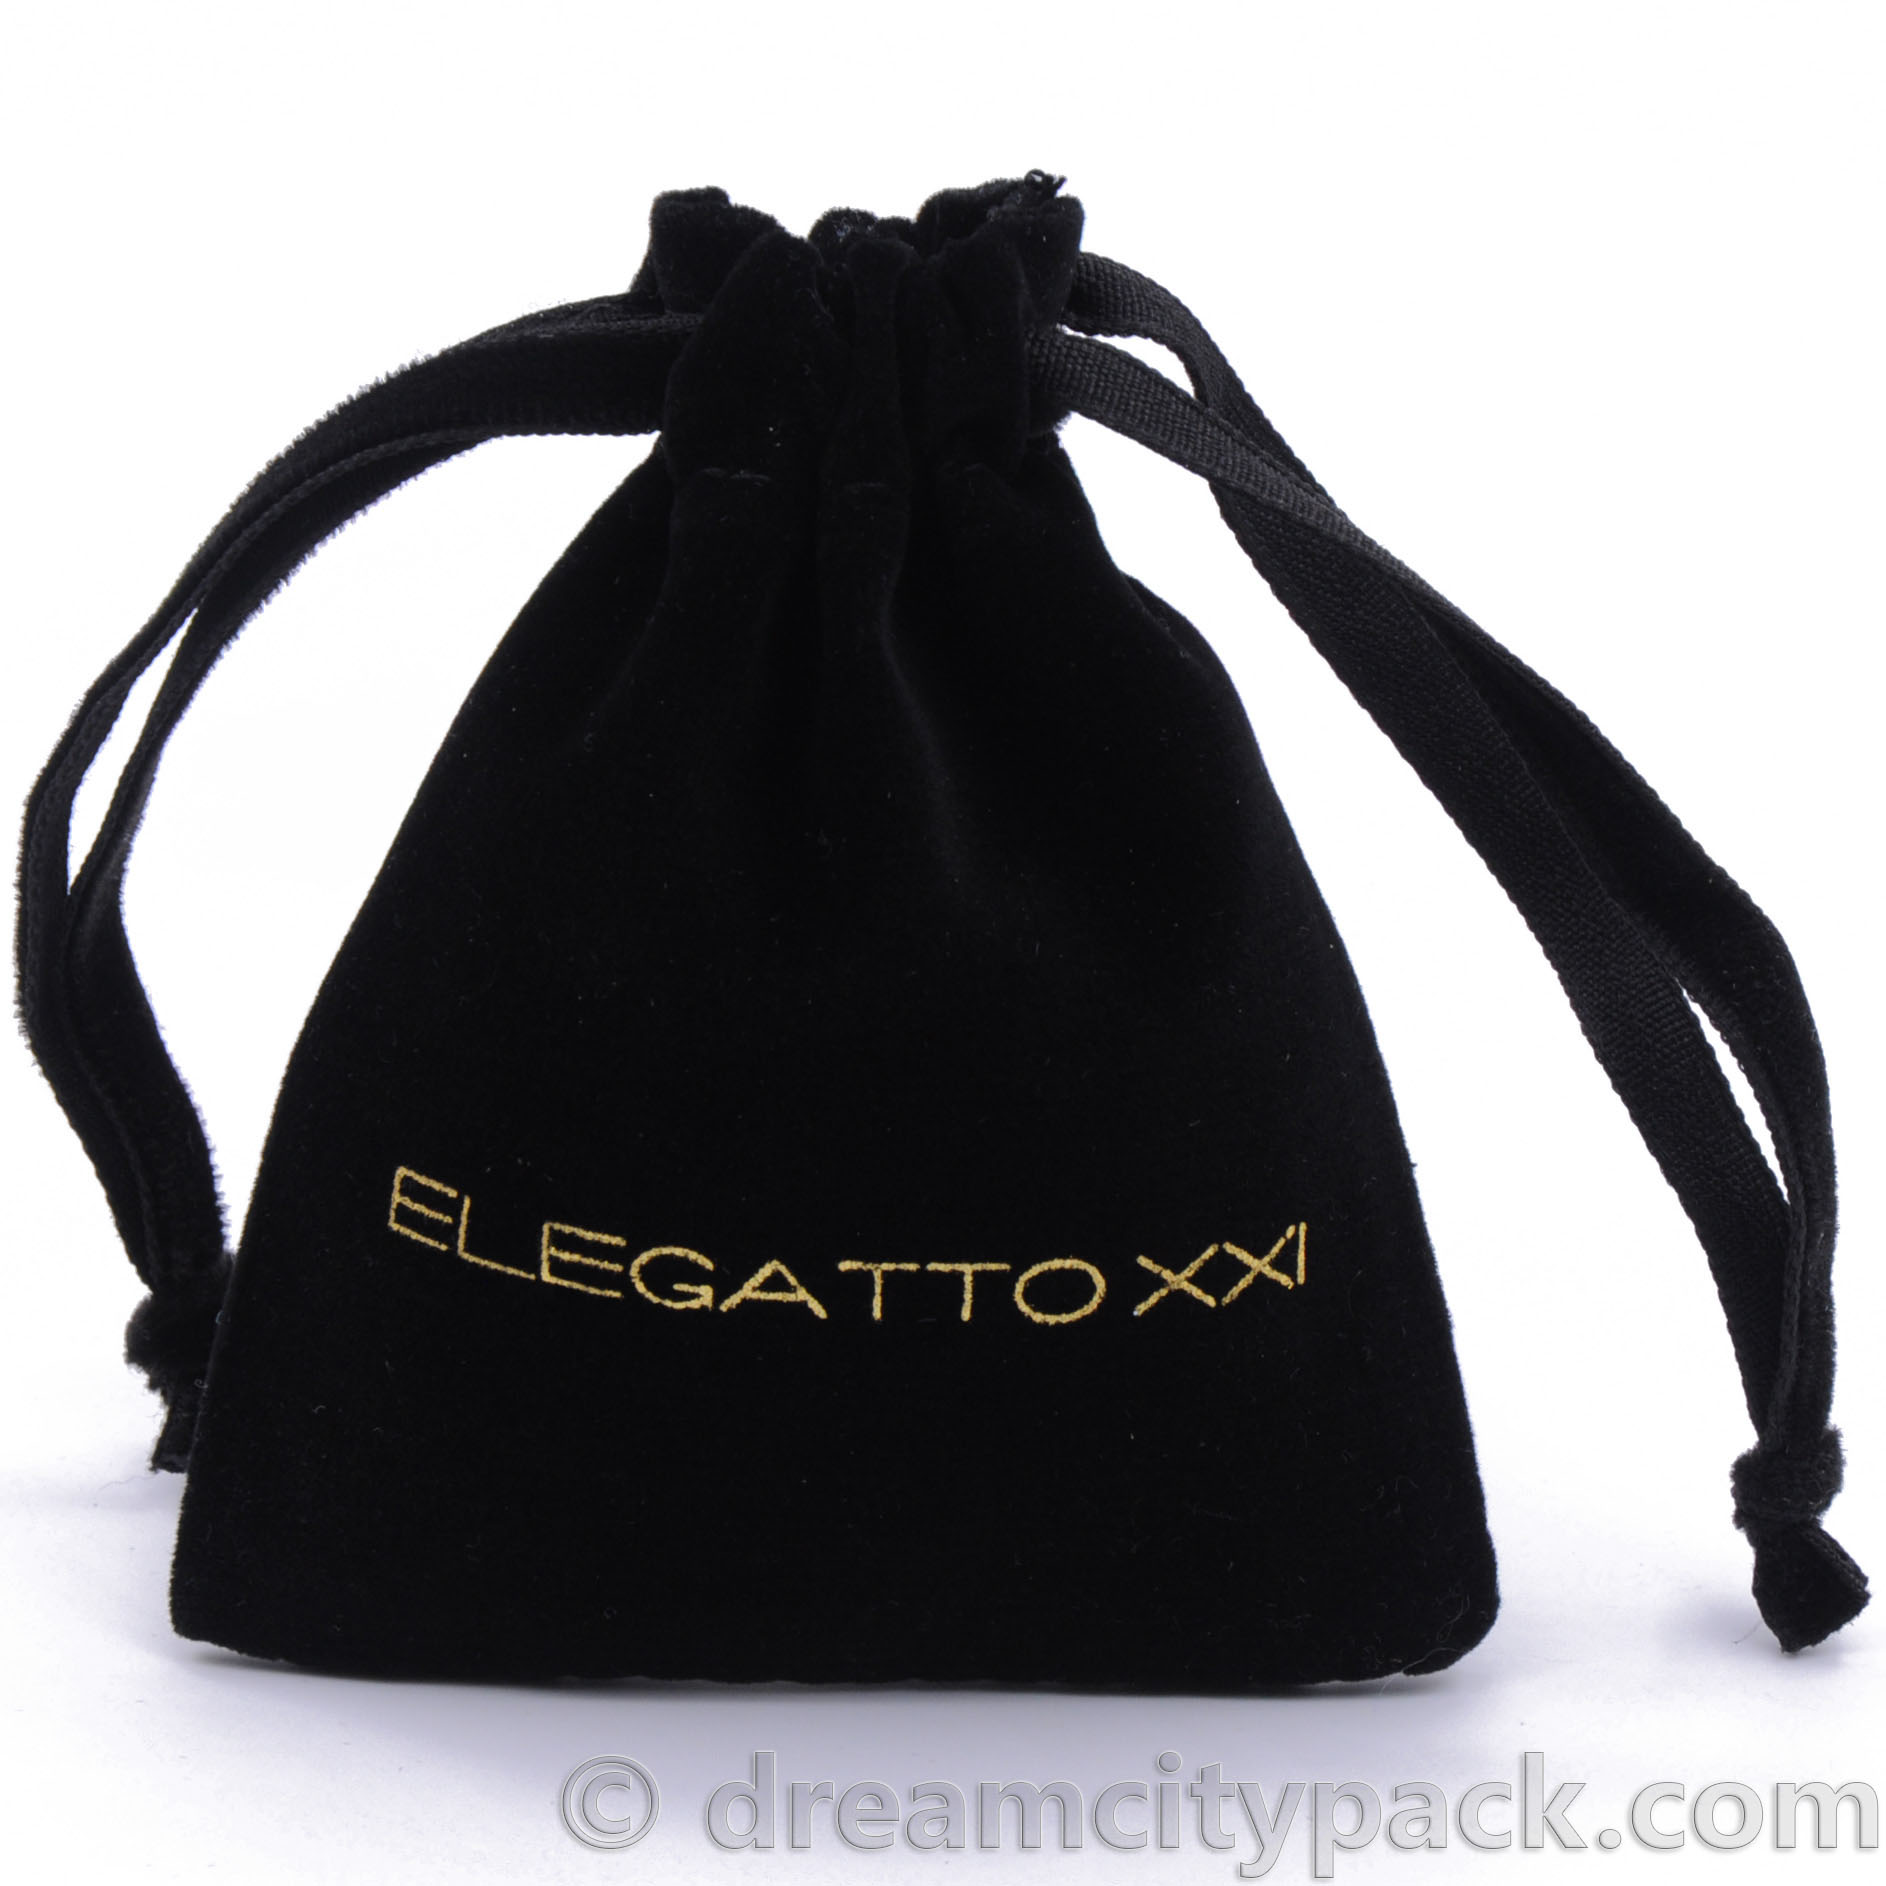 Custom logo drawstring jewelry bags velvet pouches small jewelry bags